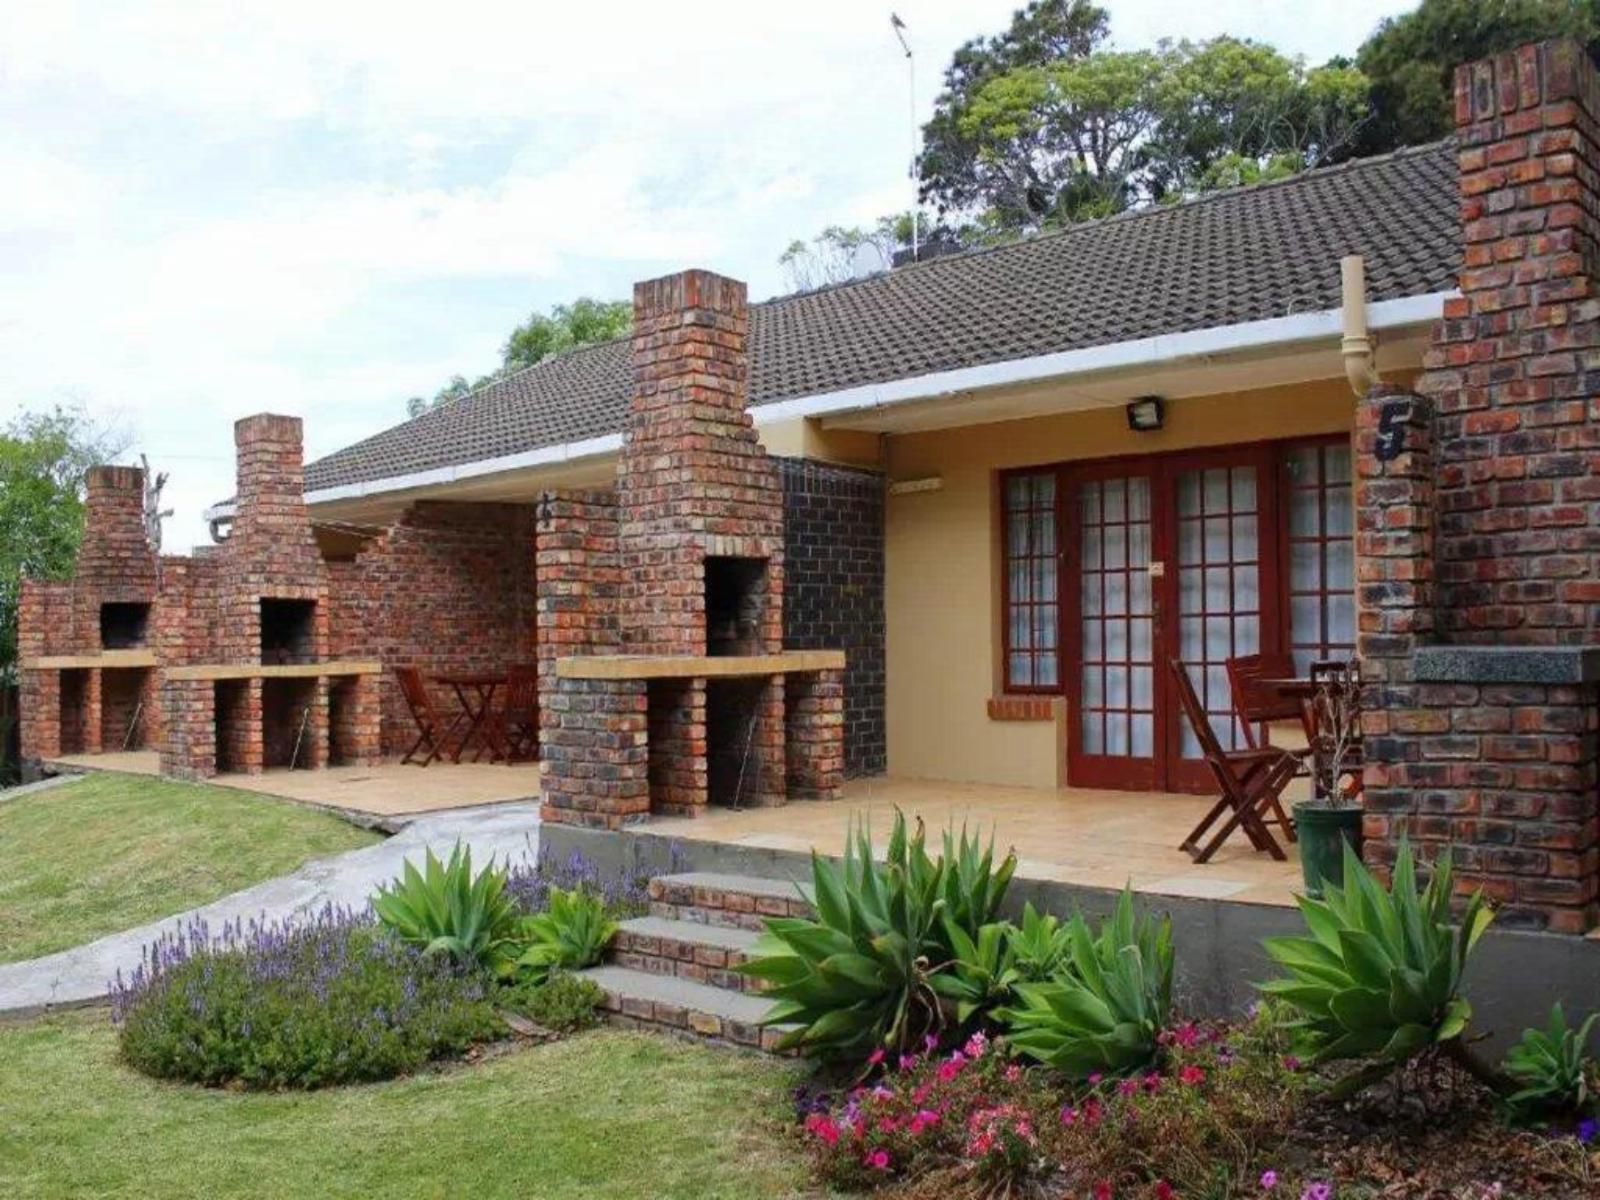 African Aquila Guest Lodge Walmer Port Elizabeth Eastern Cape South Africa House, Building, Architecture